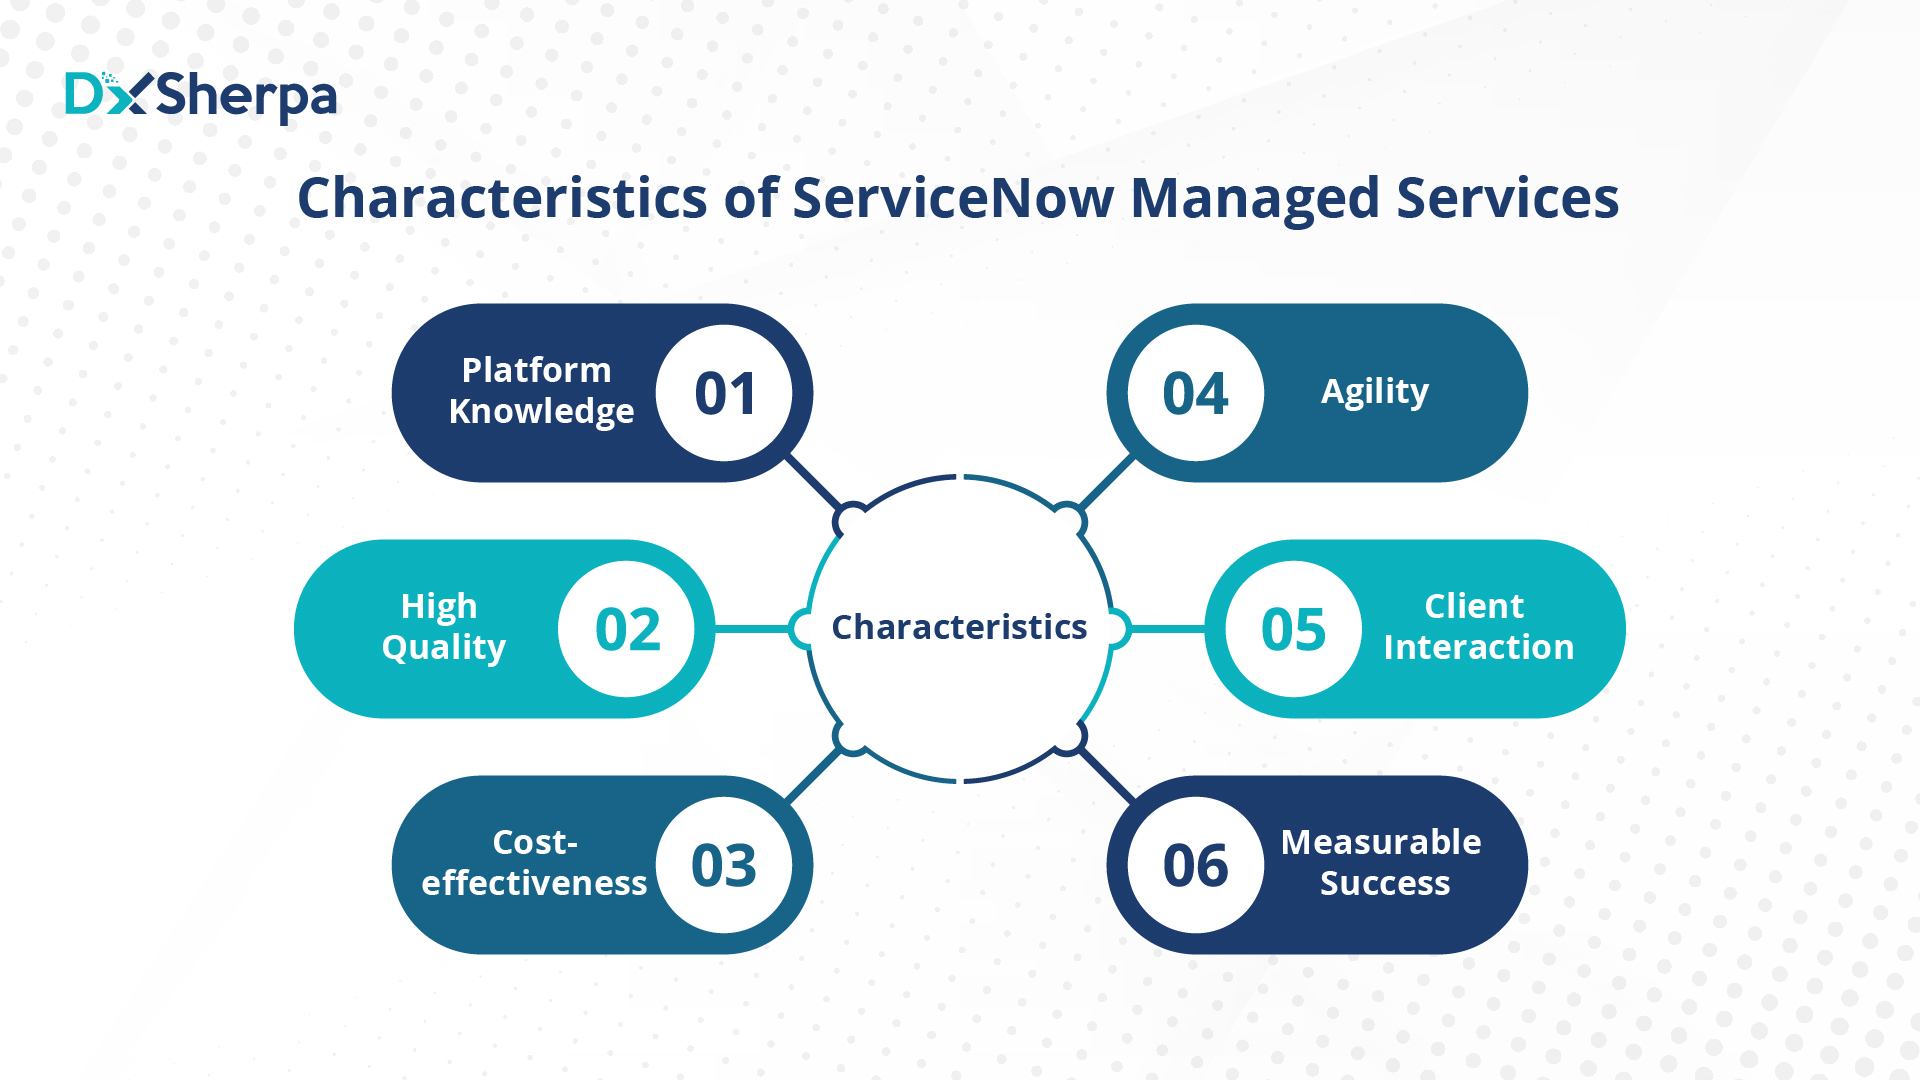 ServiceNow Managed Services